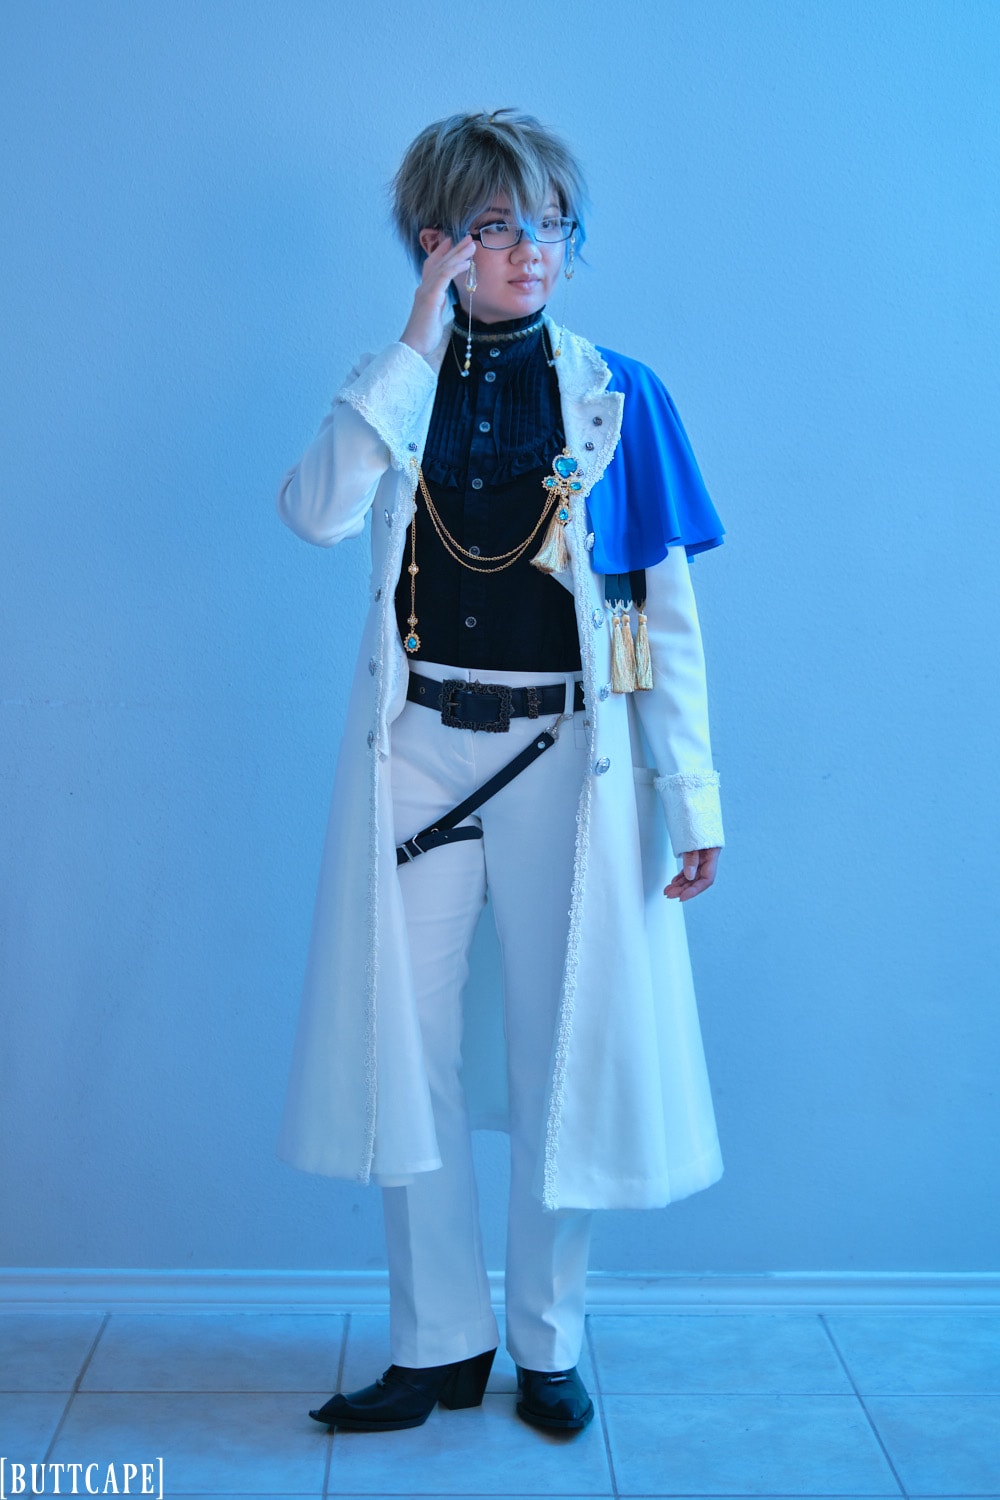 white ouji outfit inspired by Ike Eveland.